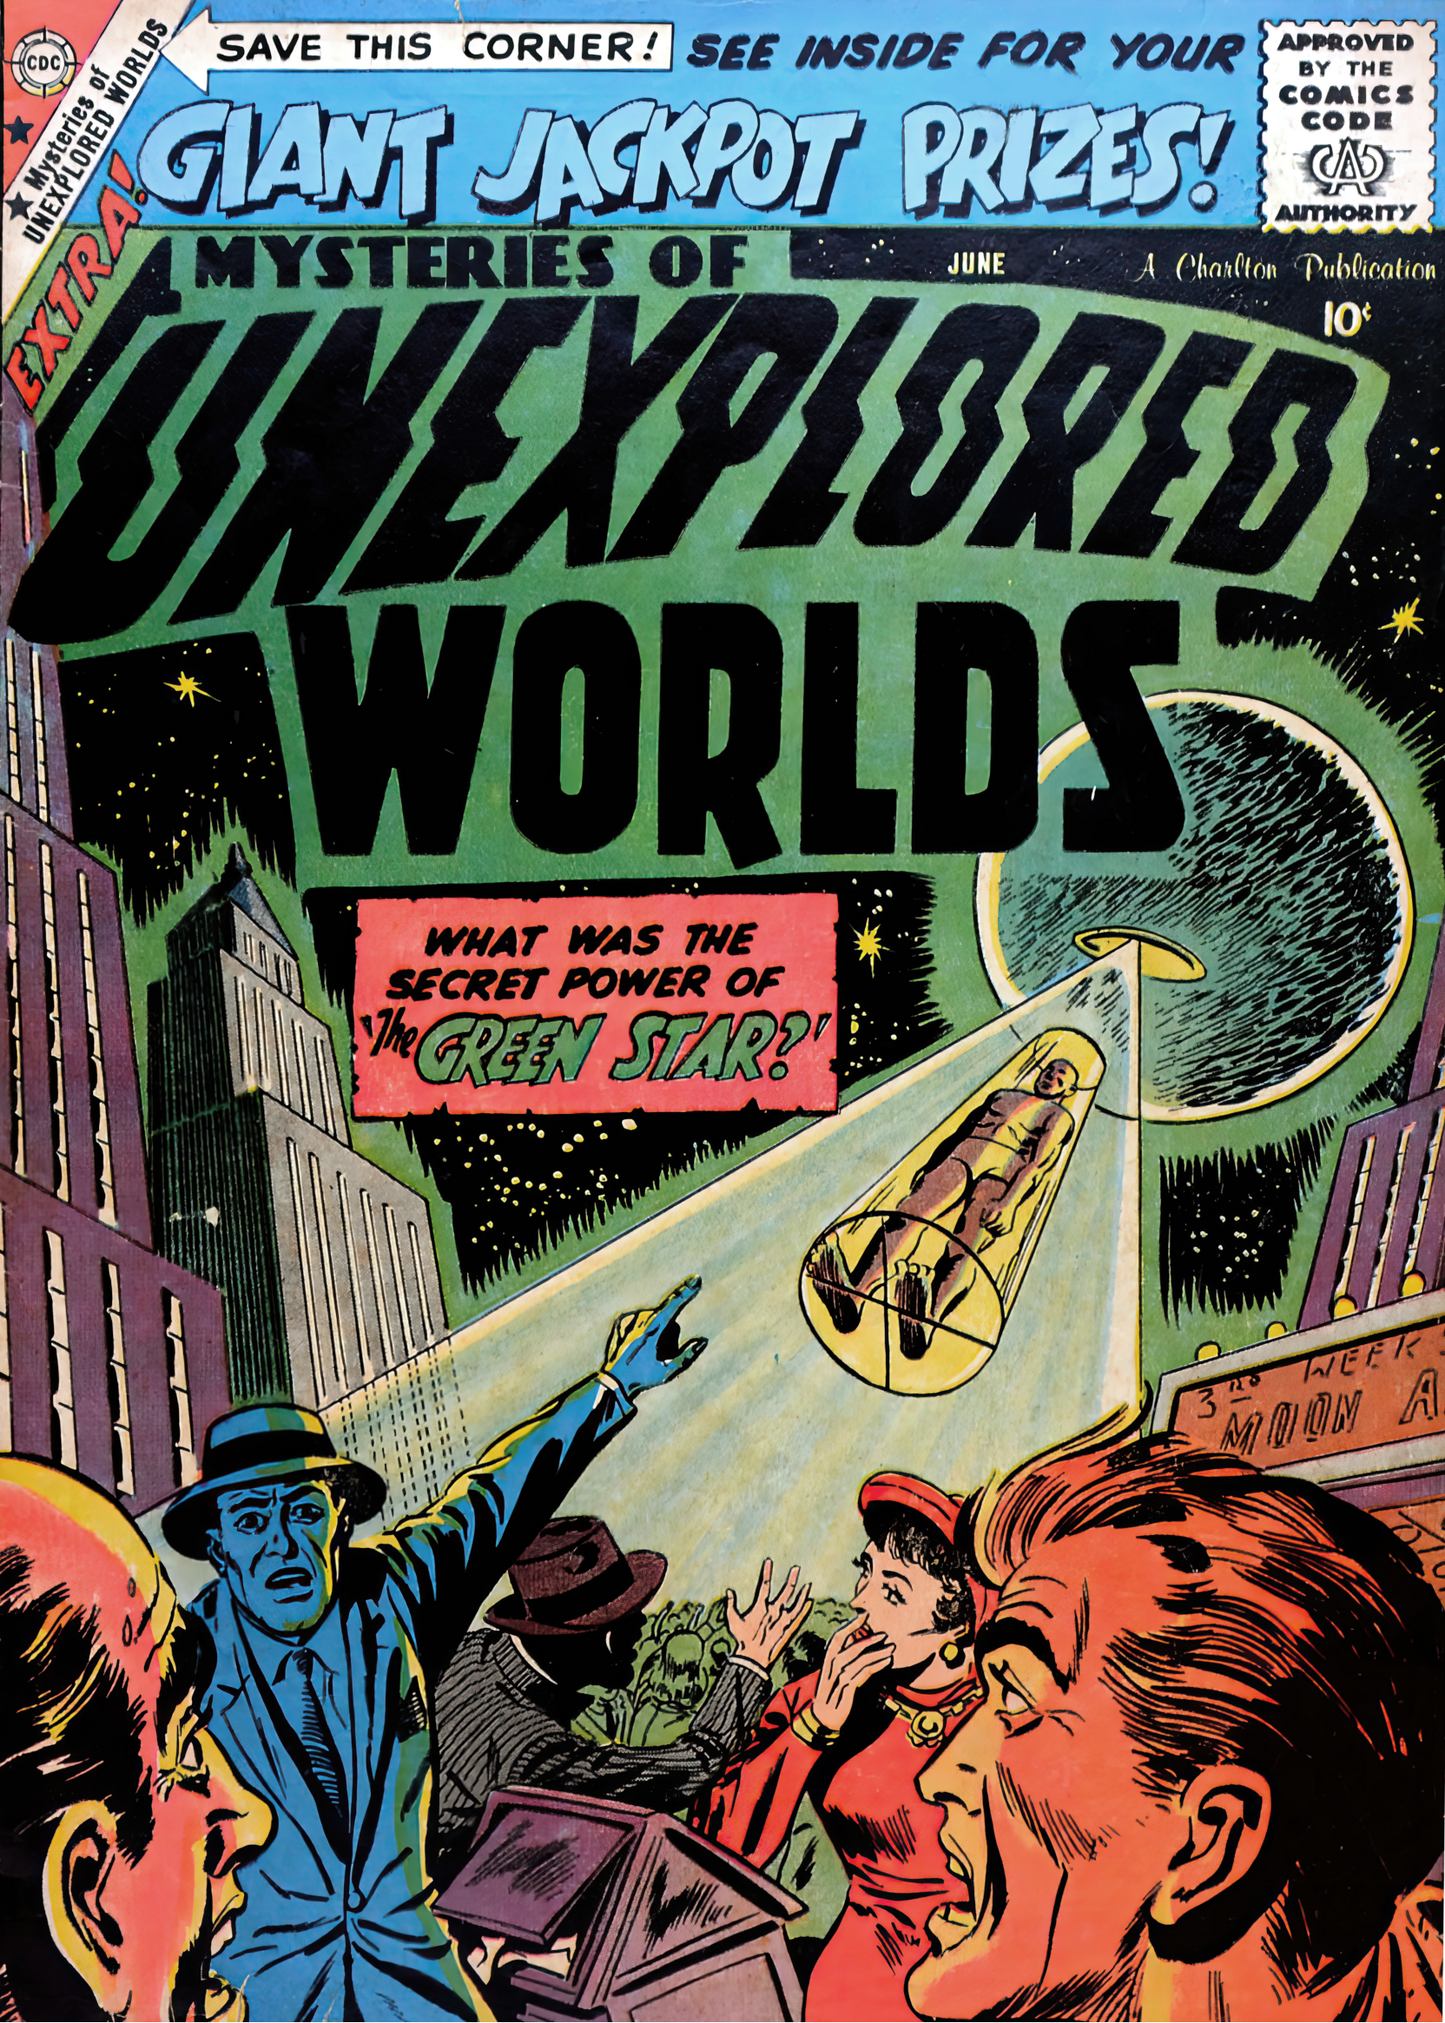 #990 Mysteries of unexplored worlds